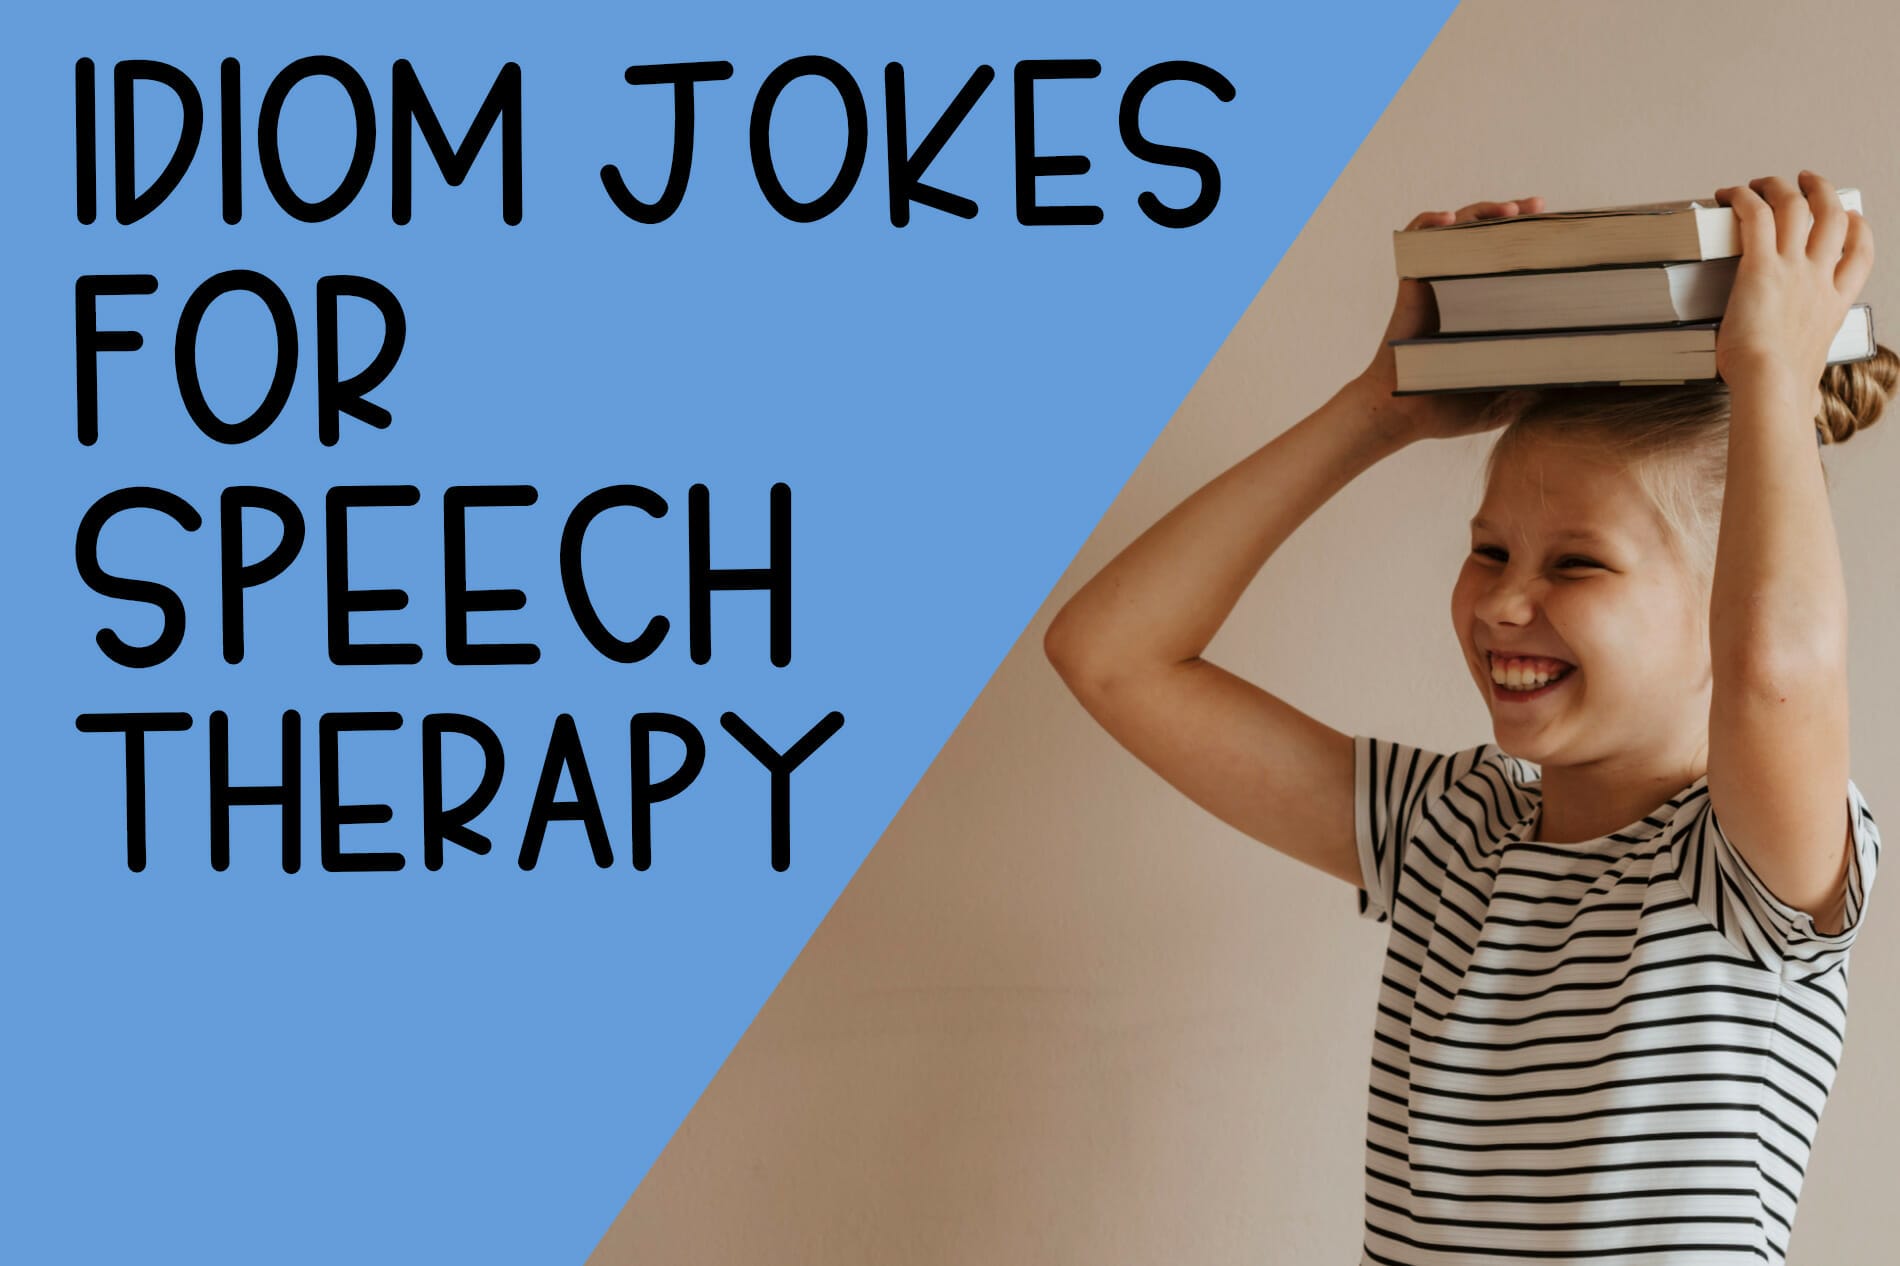 Idiom Jokes for Speech Therapy